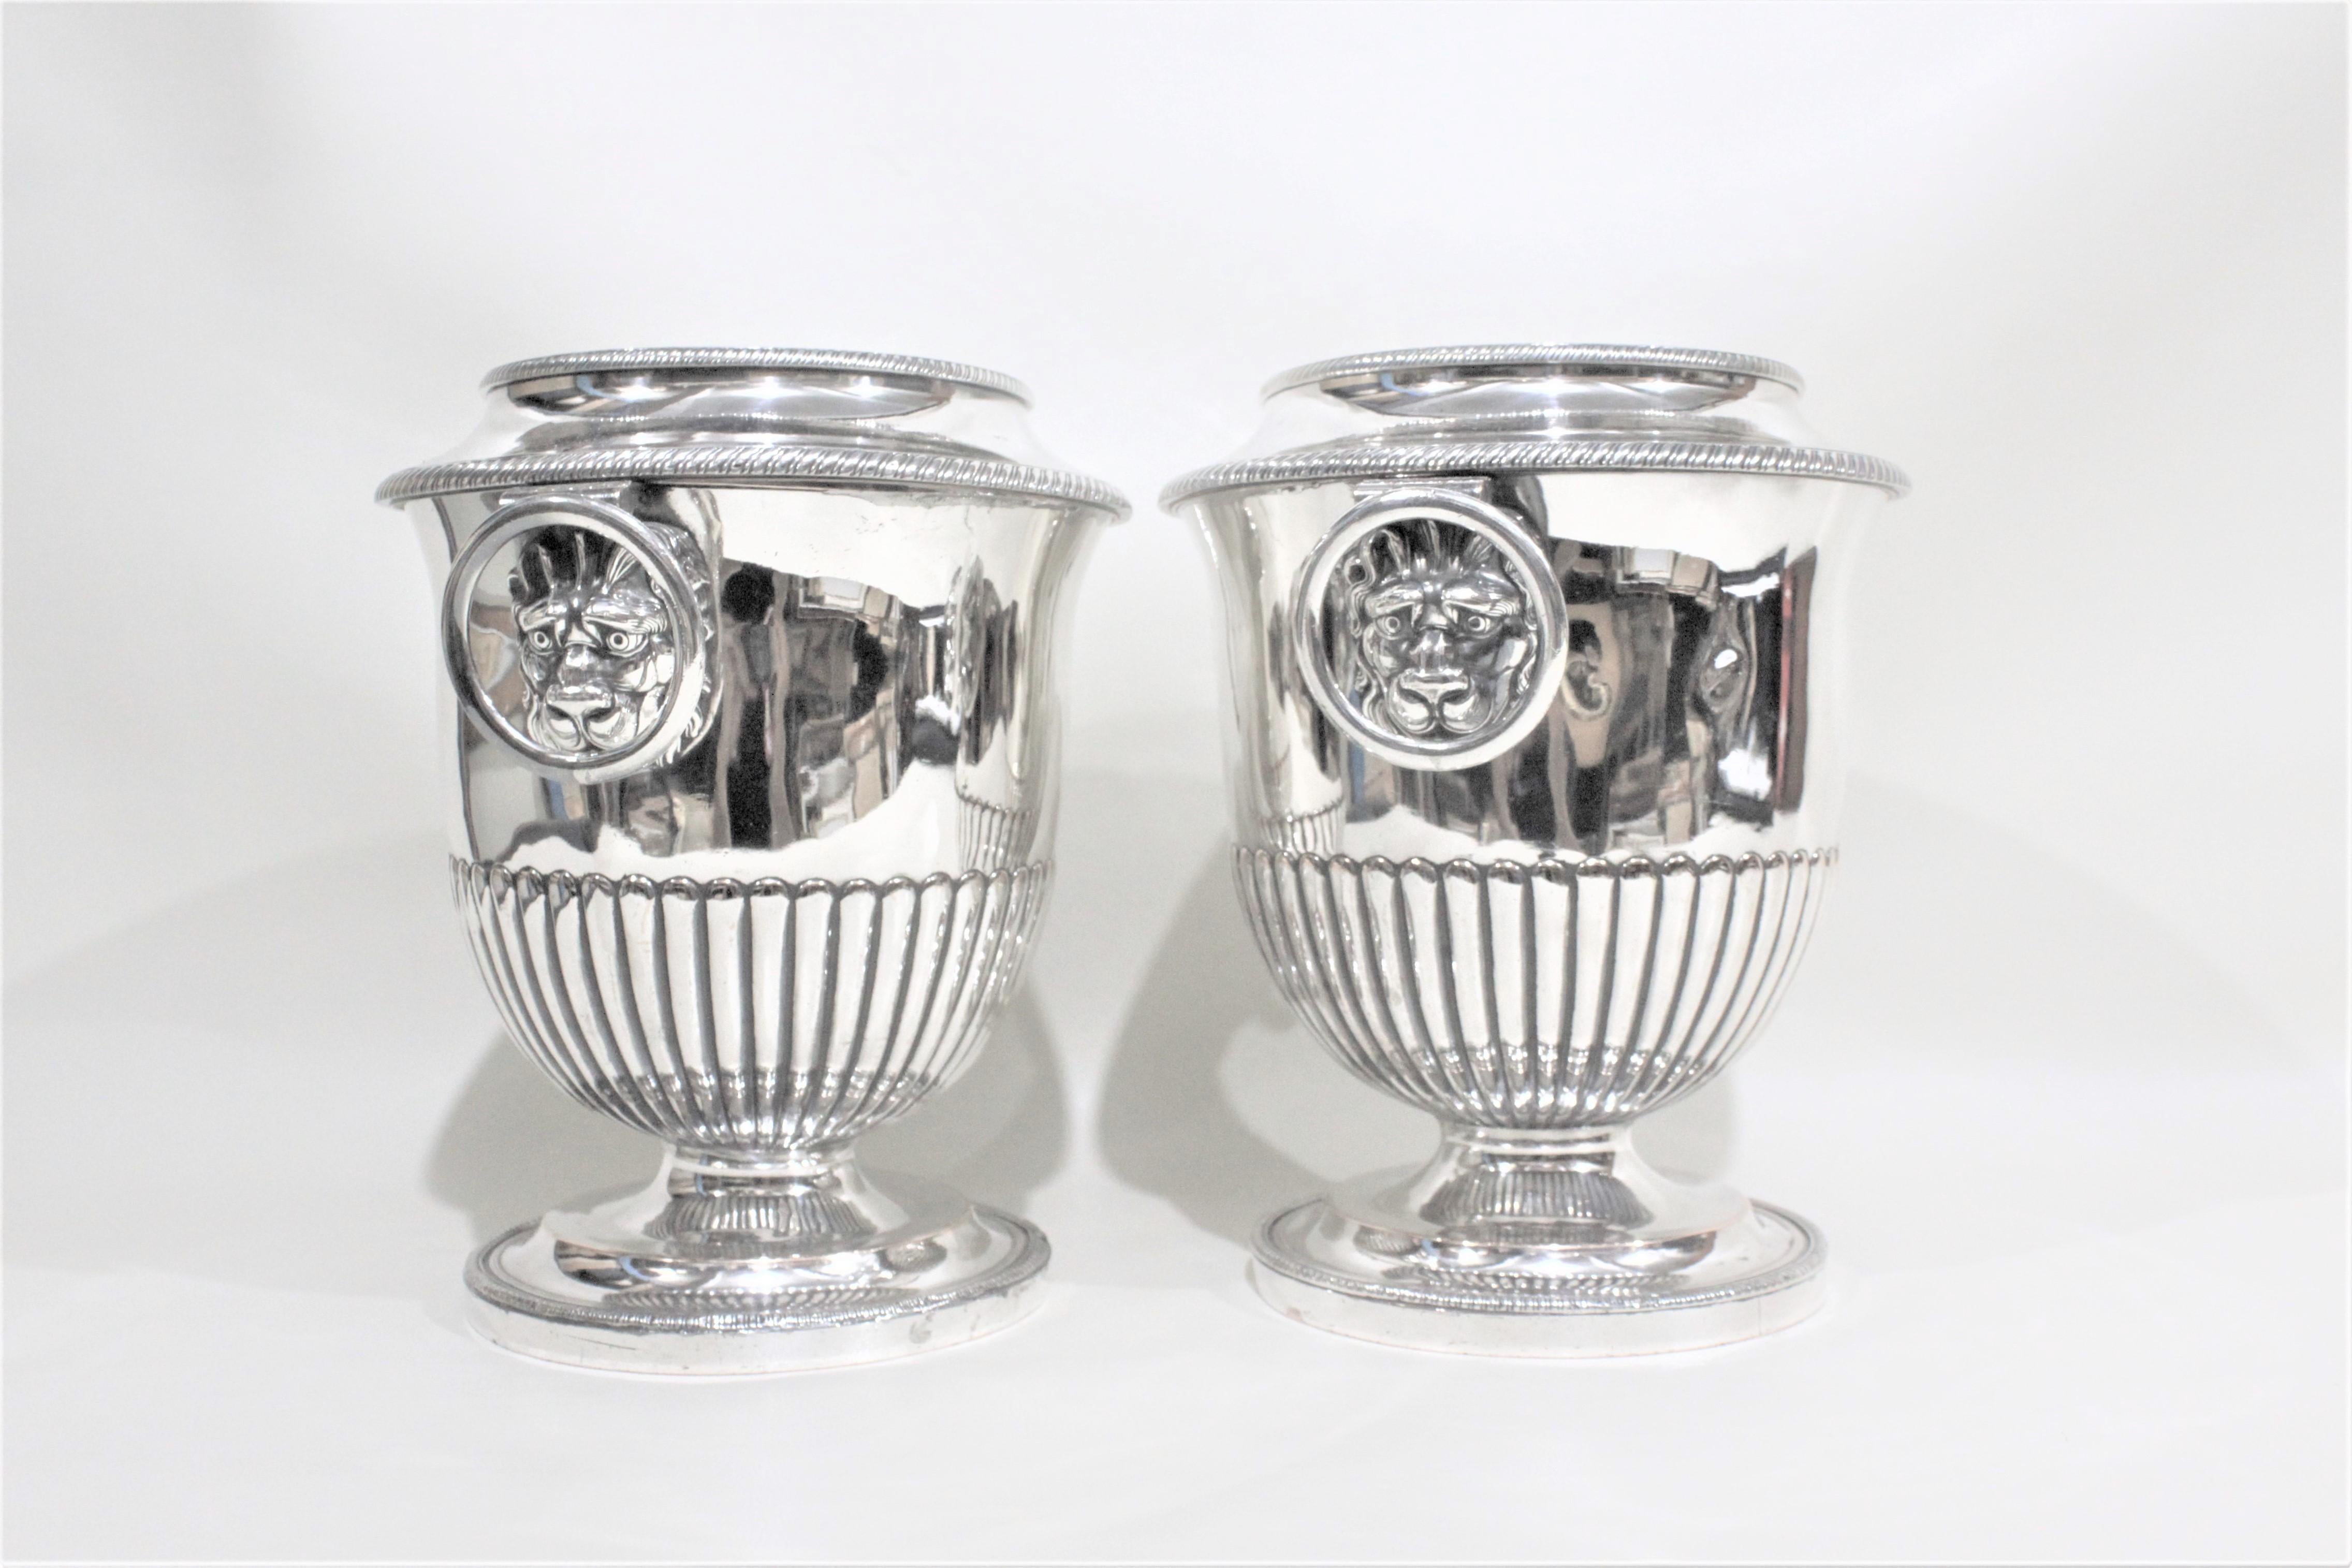 Pair of Antique Sheffield Regency Style Silver Plated Wine Coolers 2